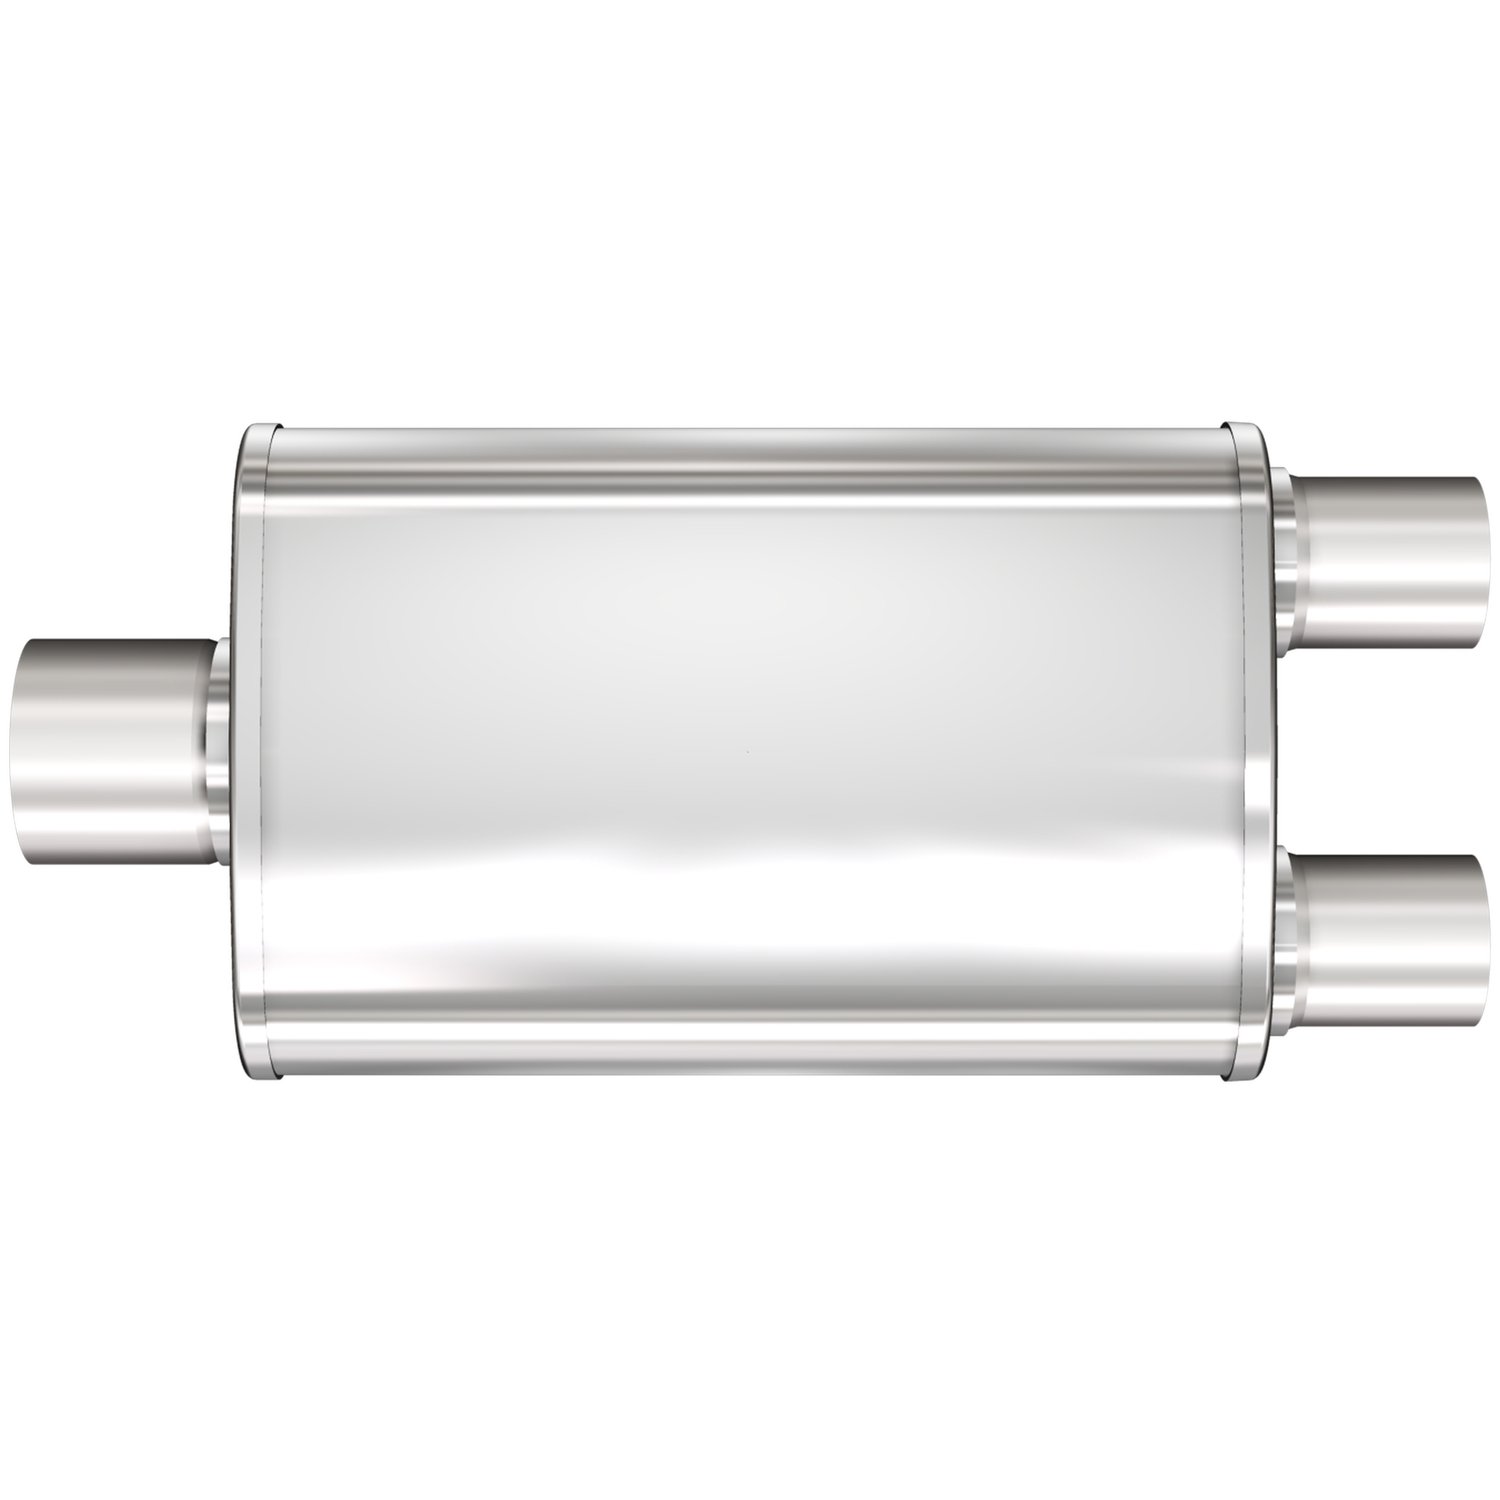 4" x 9" Oval XL 3-Chamber Muffler Single In/Dual Out: 3"/2.25" Body Length: 14" Overall Length: 20" Satin Finish